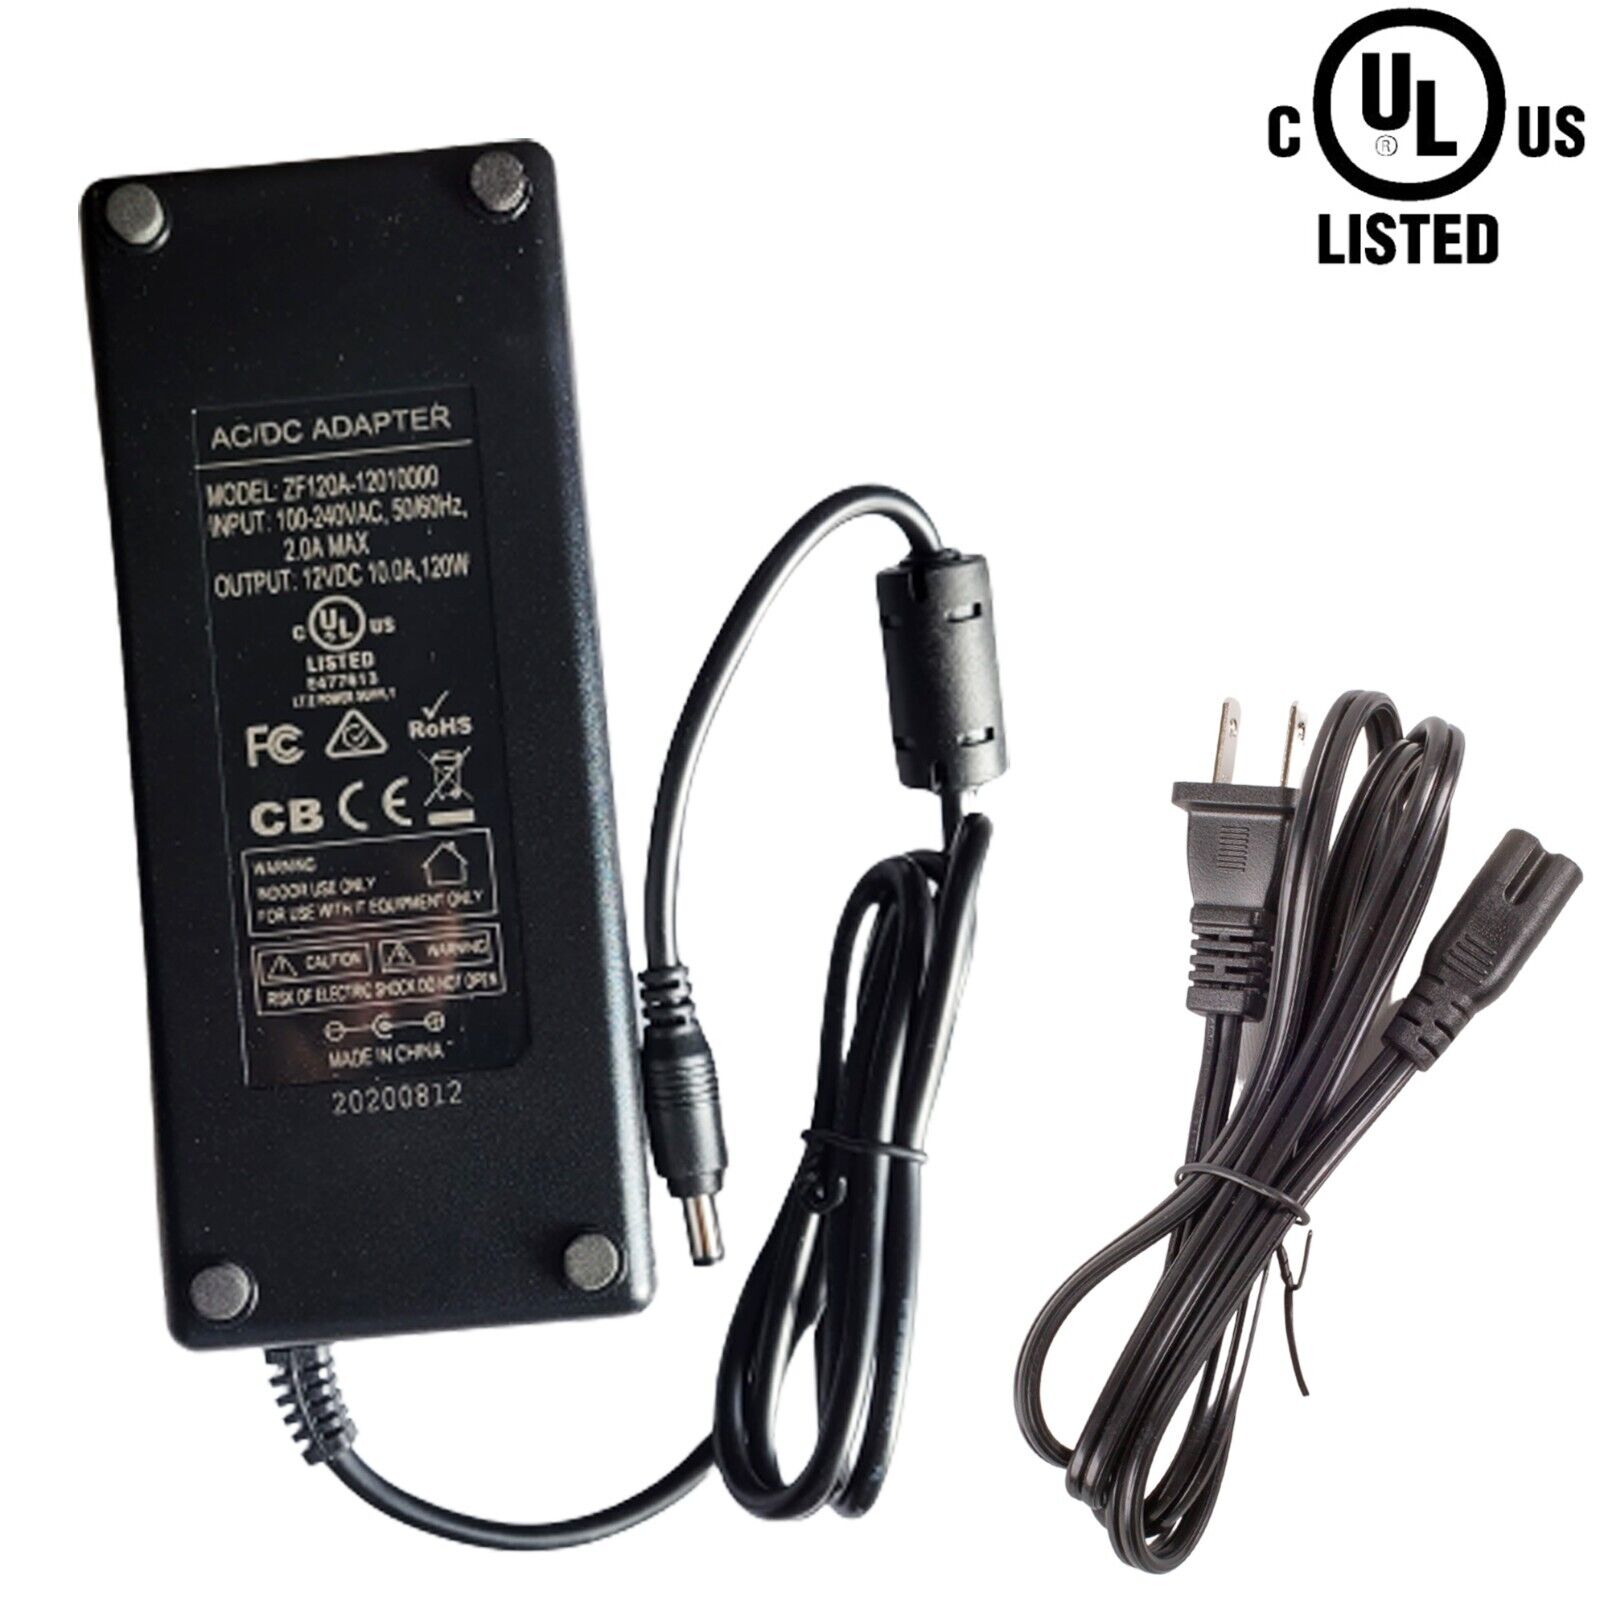 UL LISTED 12V 10A 120W POWER SUPPLY driver for LED light Strip module showcase